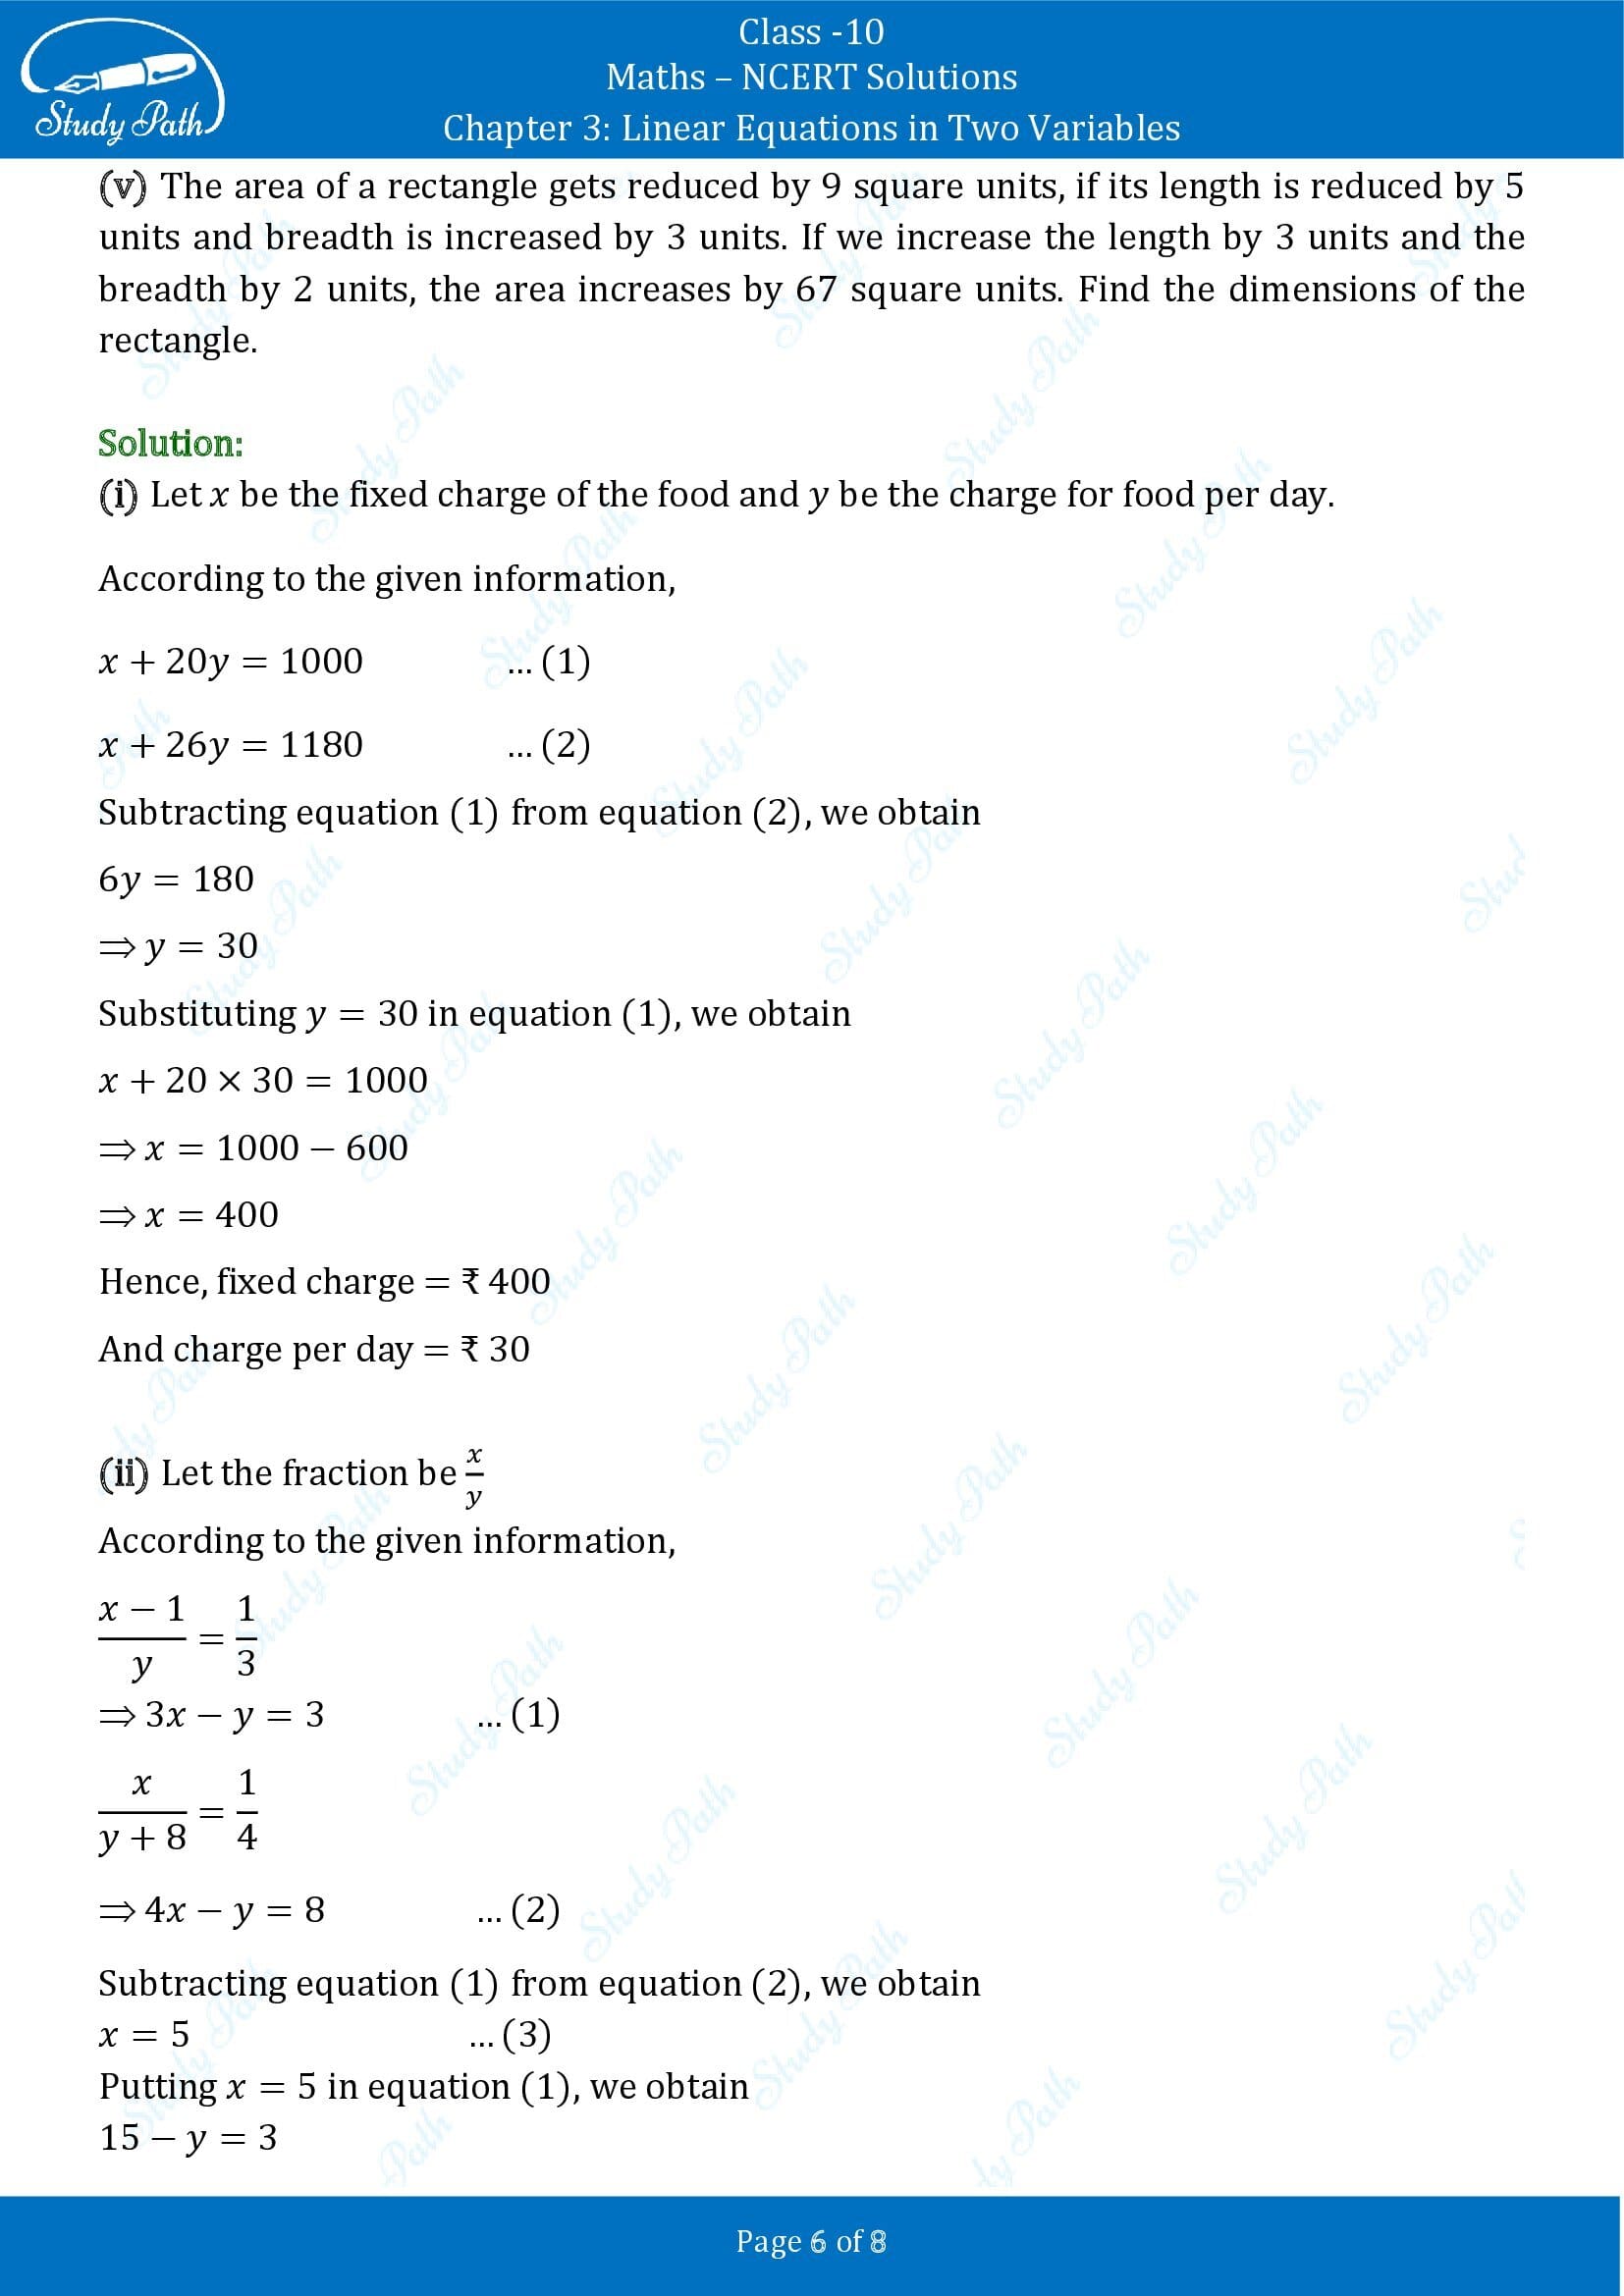 NCERT Solutions for Class 10 Maths Chapter 3 Linear Equations in Two Variables Exercise 3.5 00006